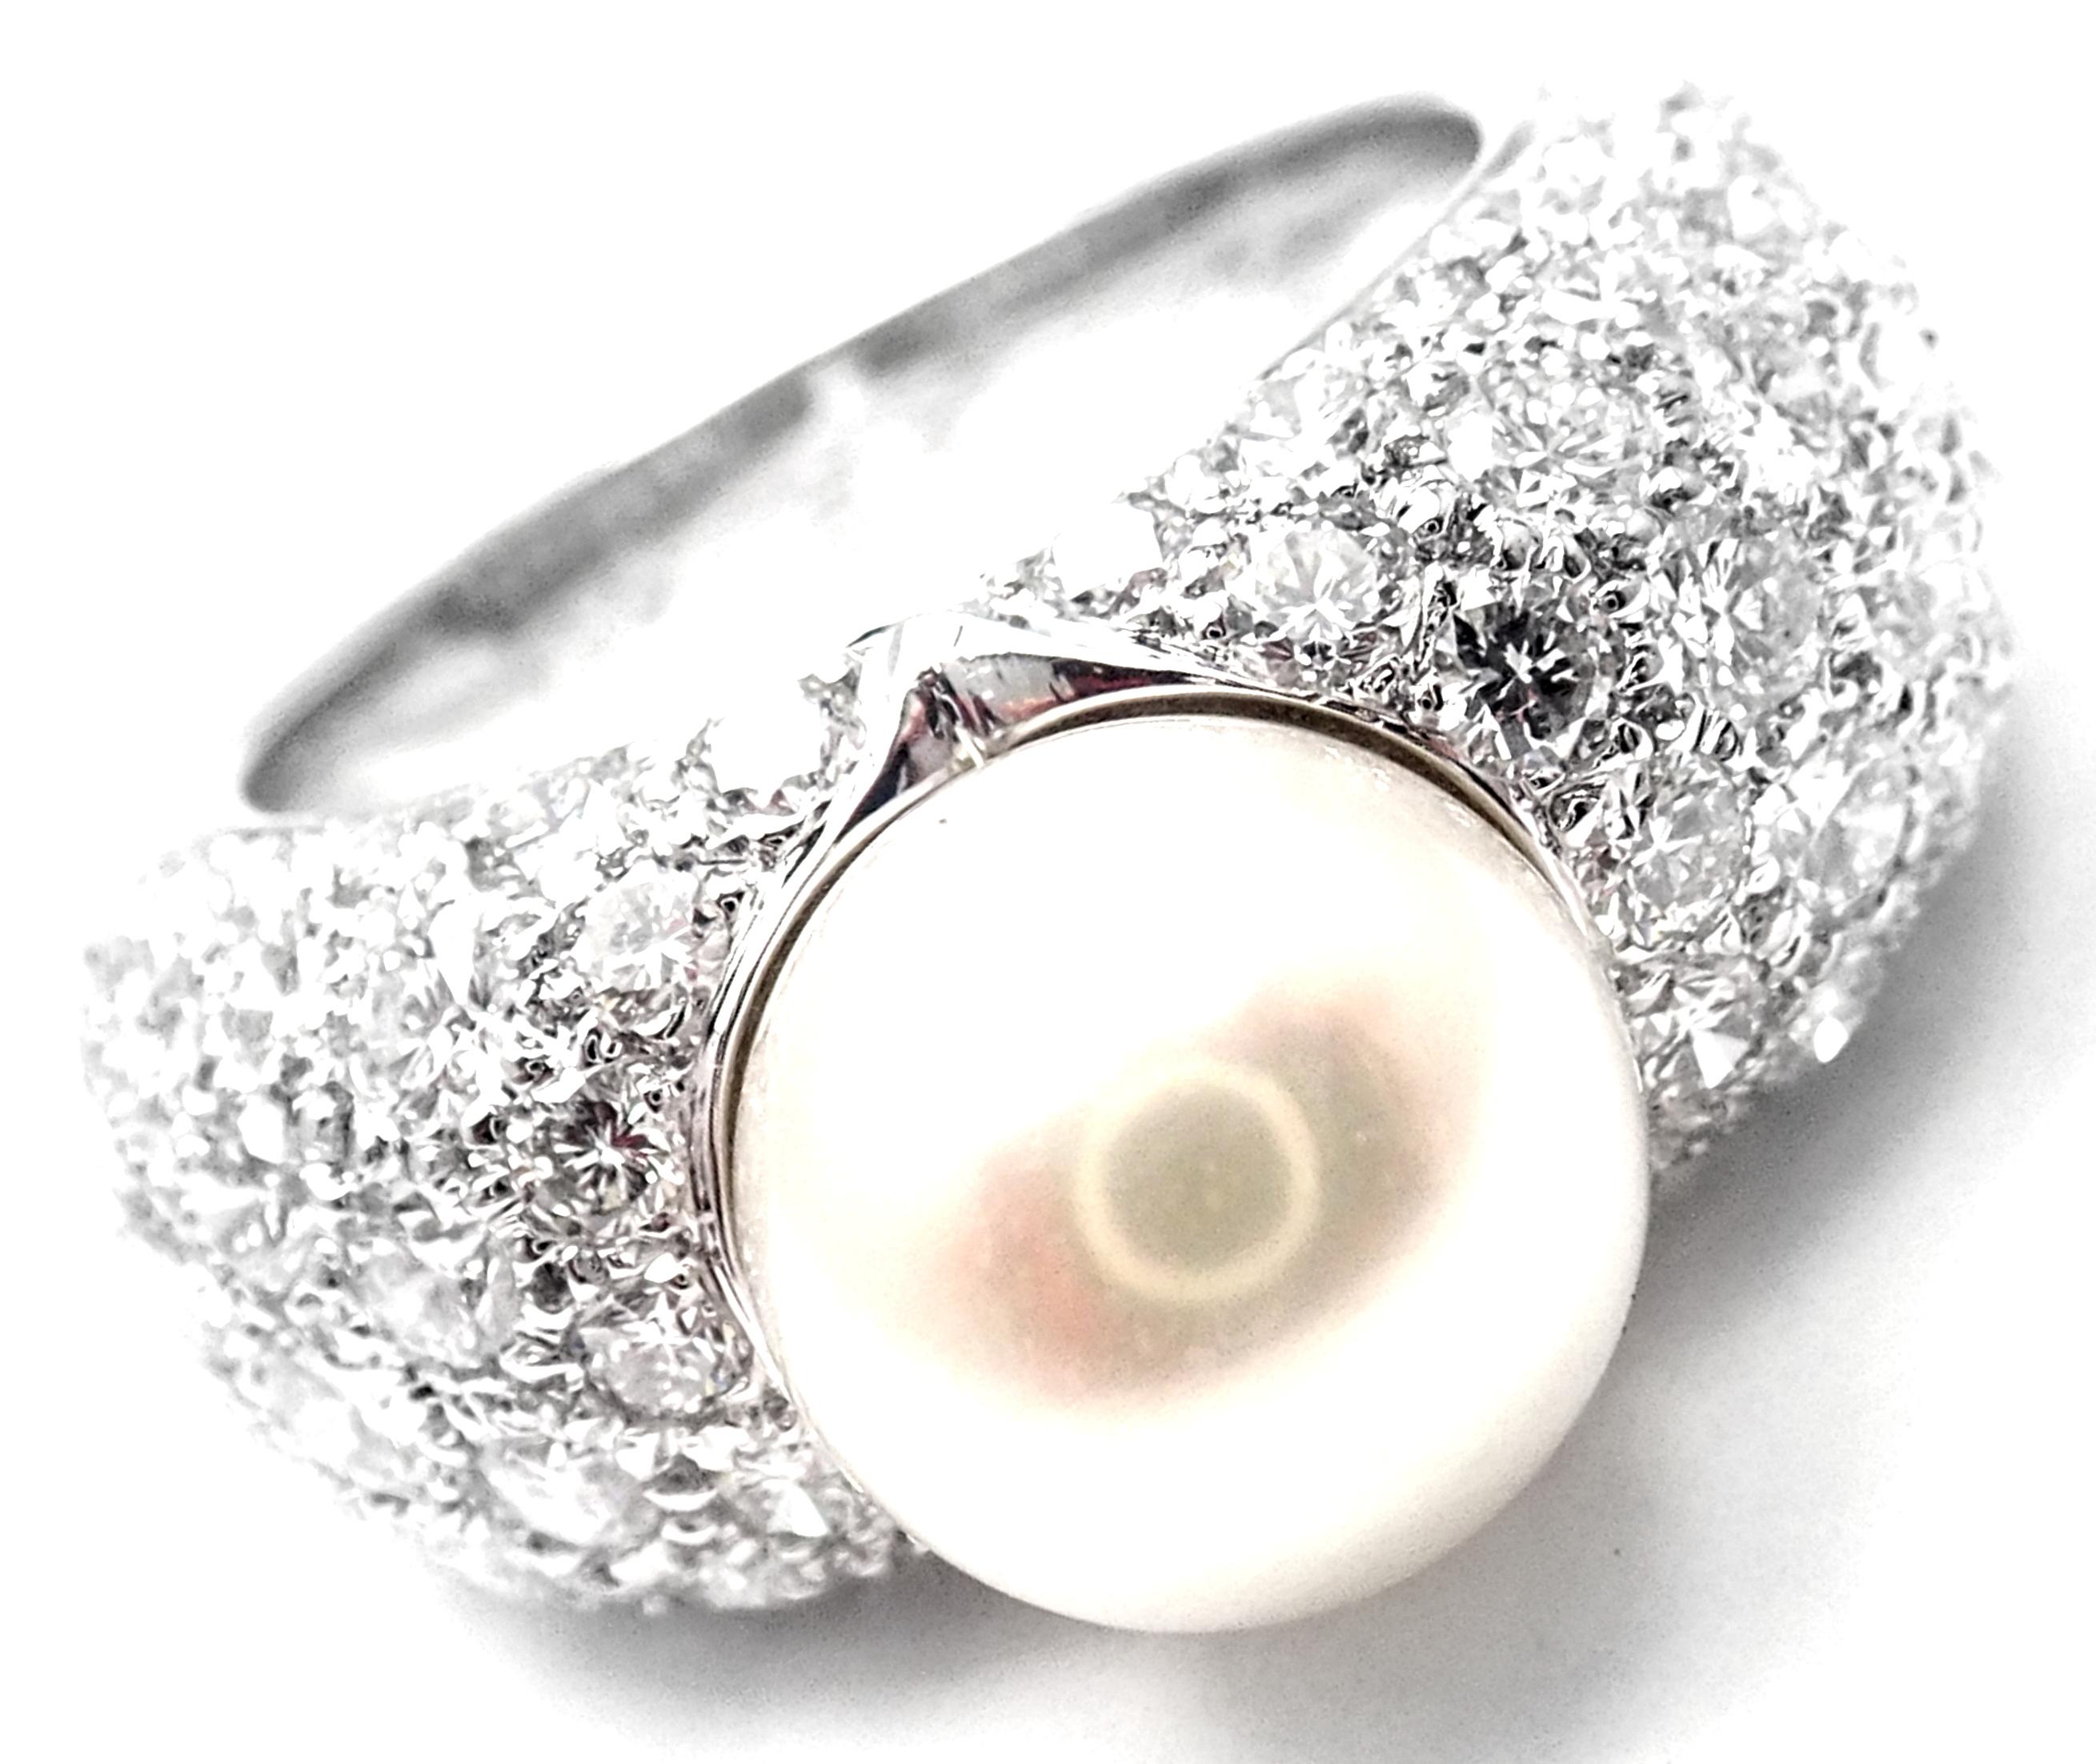 18k White Gold Diamond And Cultured Pearl Juliette Ring by Cartier. 
With 90 Round Brilliant Cut Diamonds VVS1 clarity, E color 
total weight approx. 5ct and 1 cultured pearl 9mm
This ring is in mint condition and it comes with original Cartier